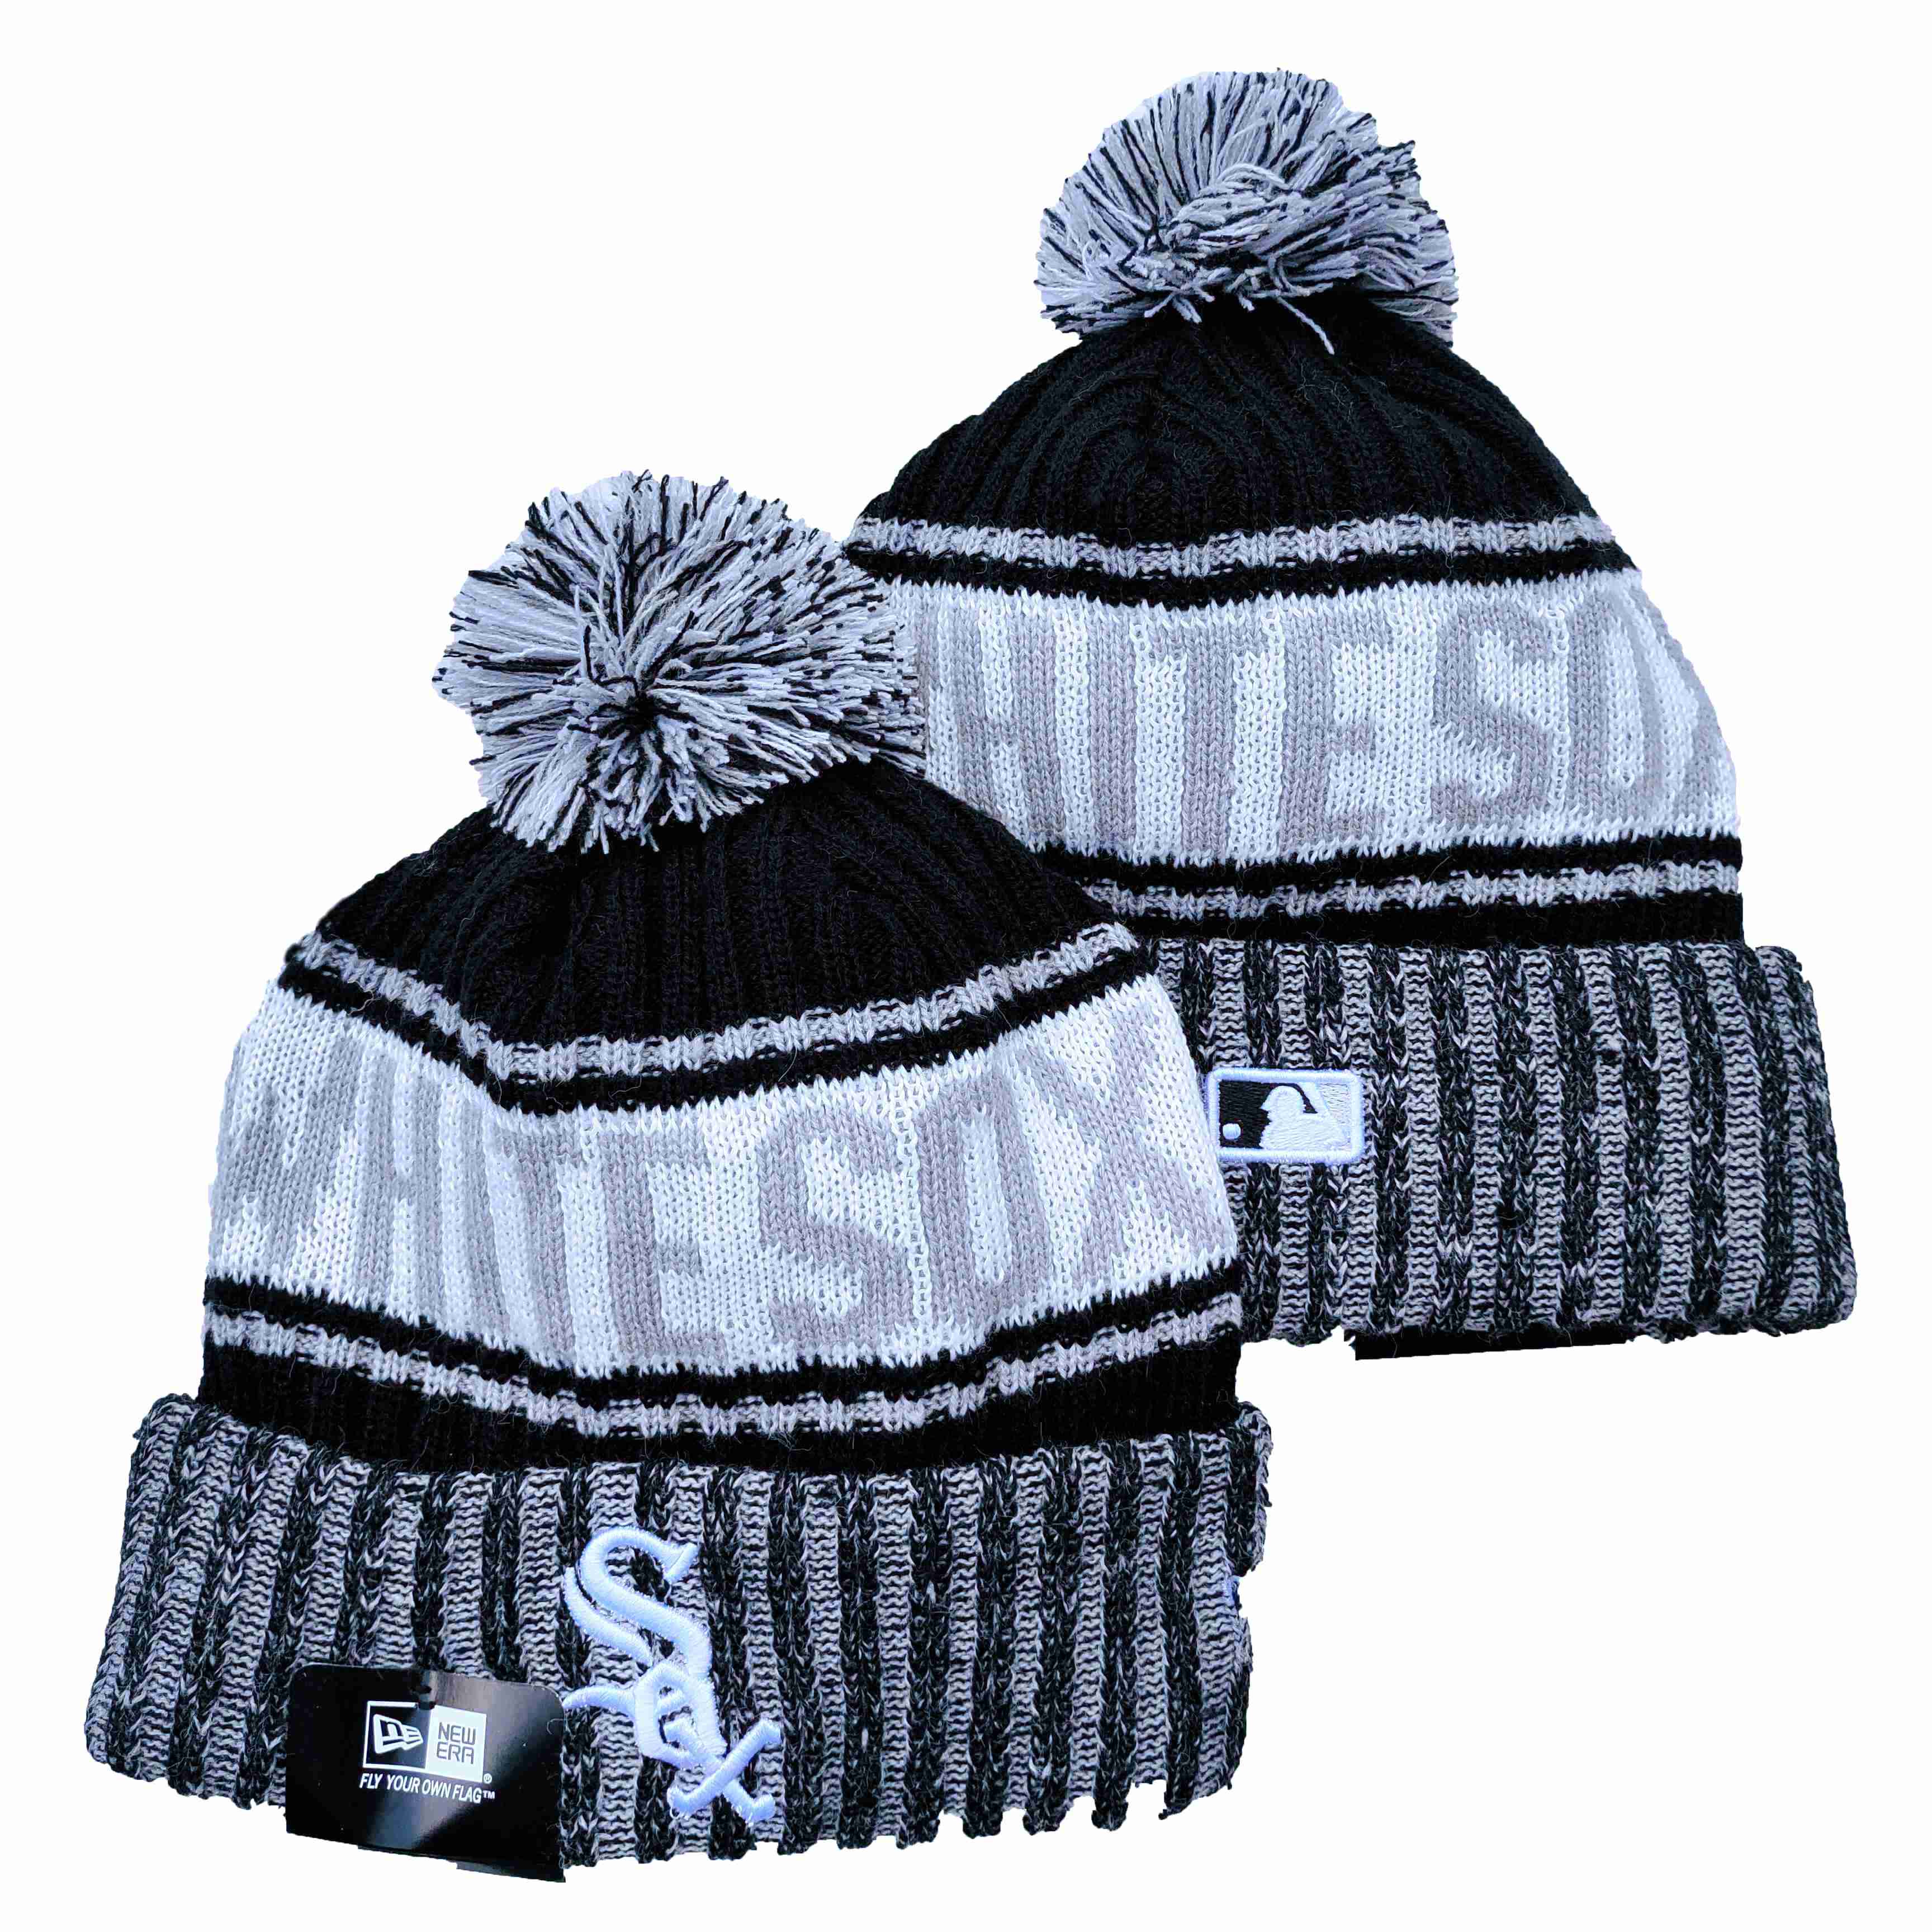 MLB Chicago White Sox Beanies Knit Hats-YD113